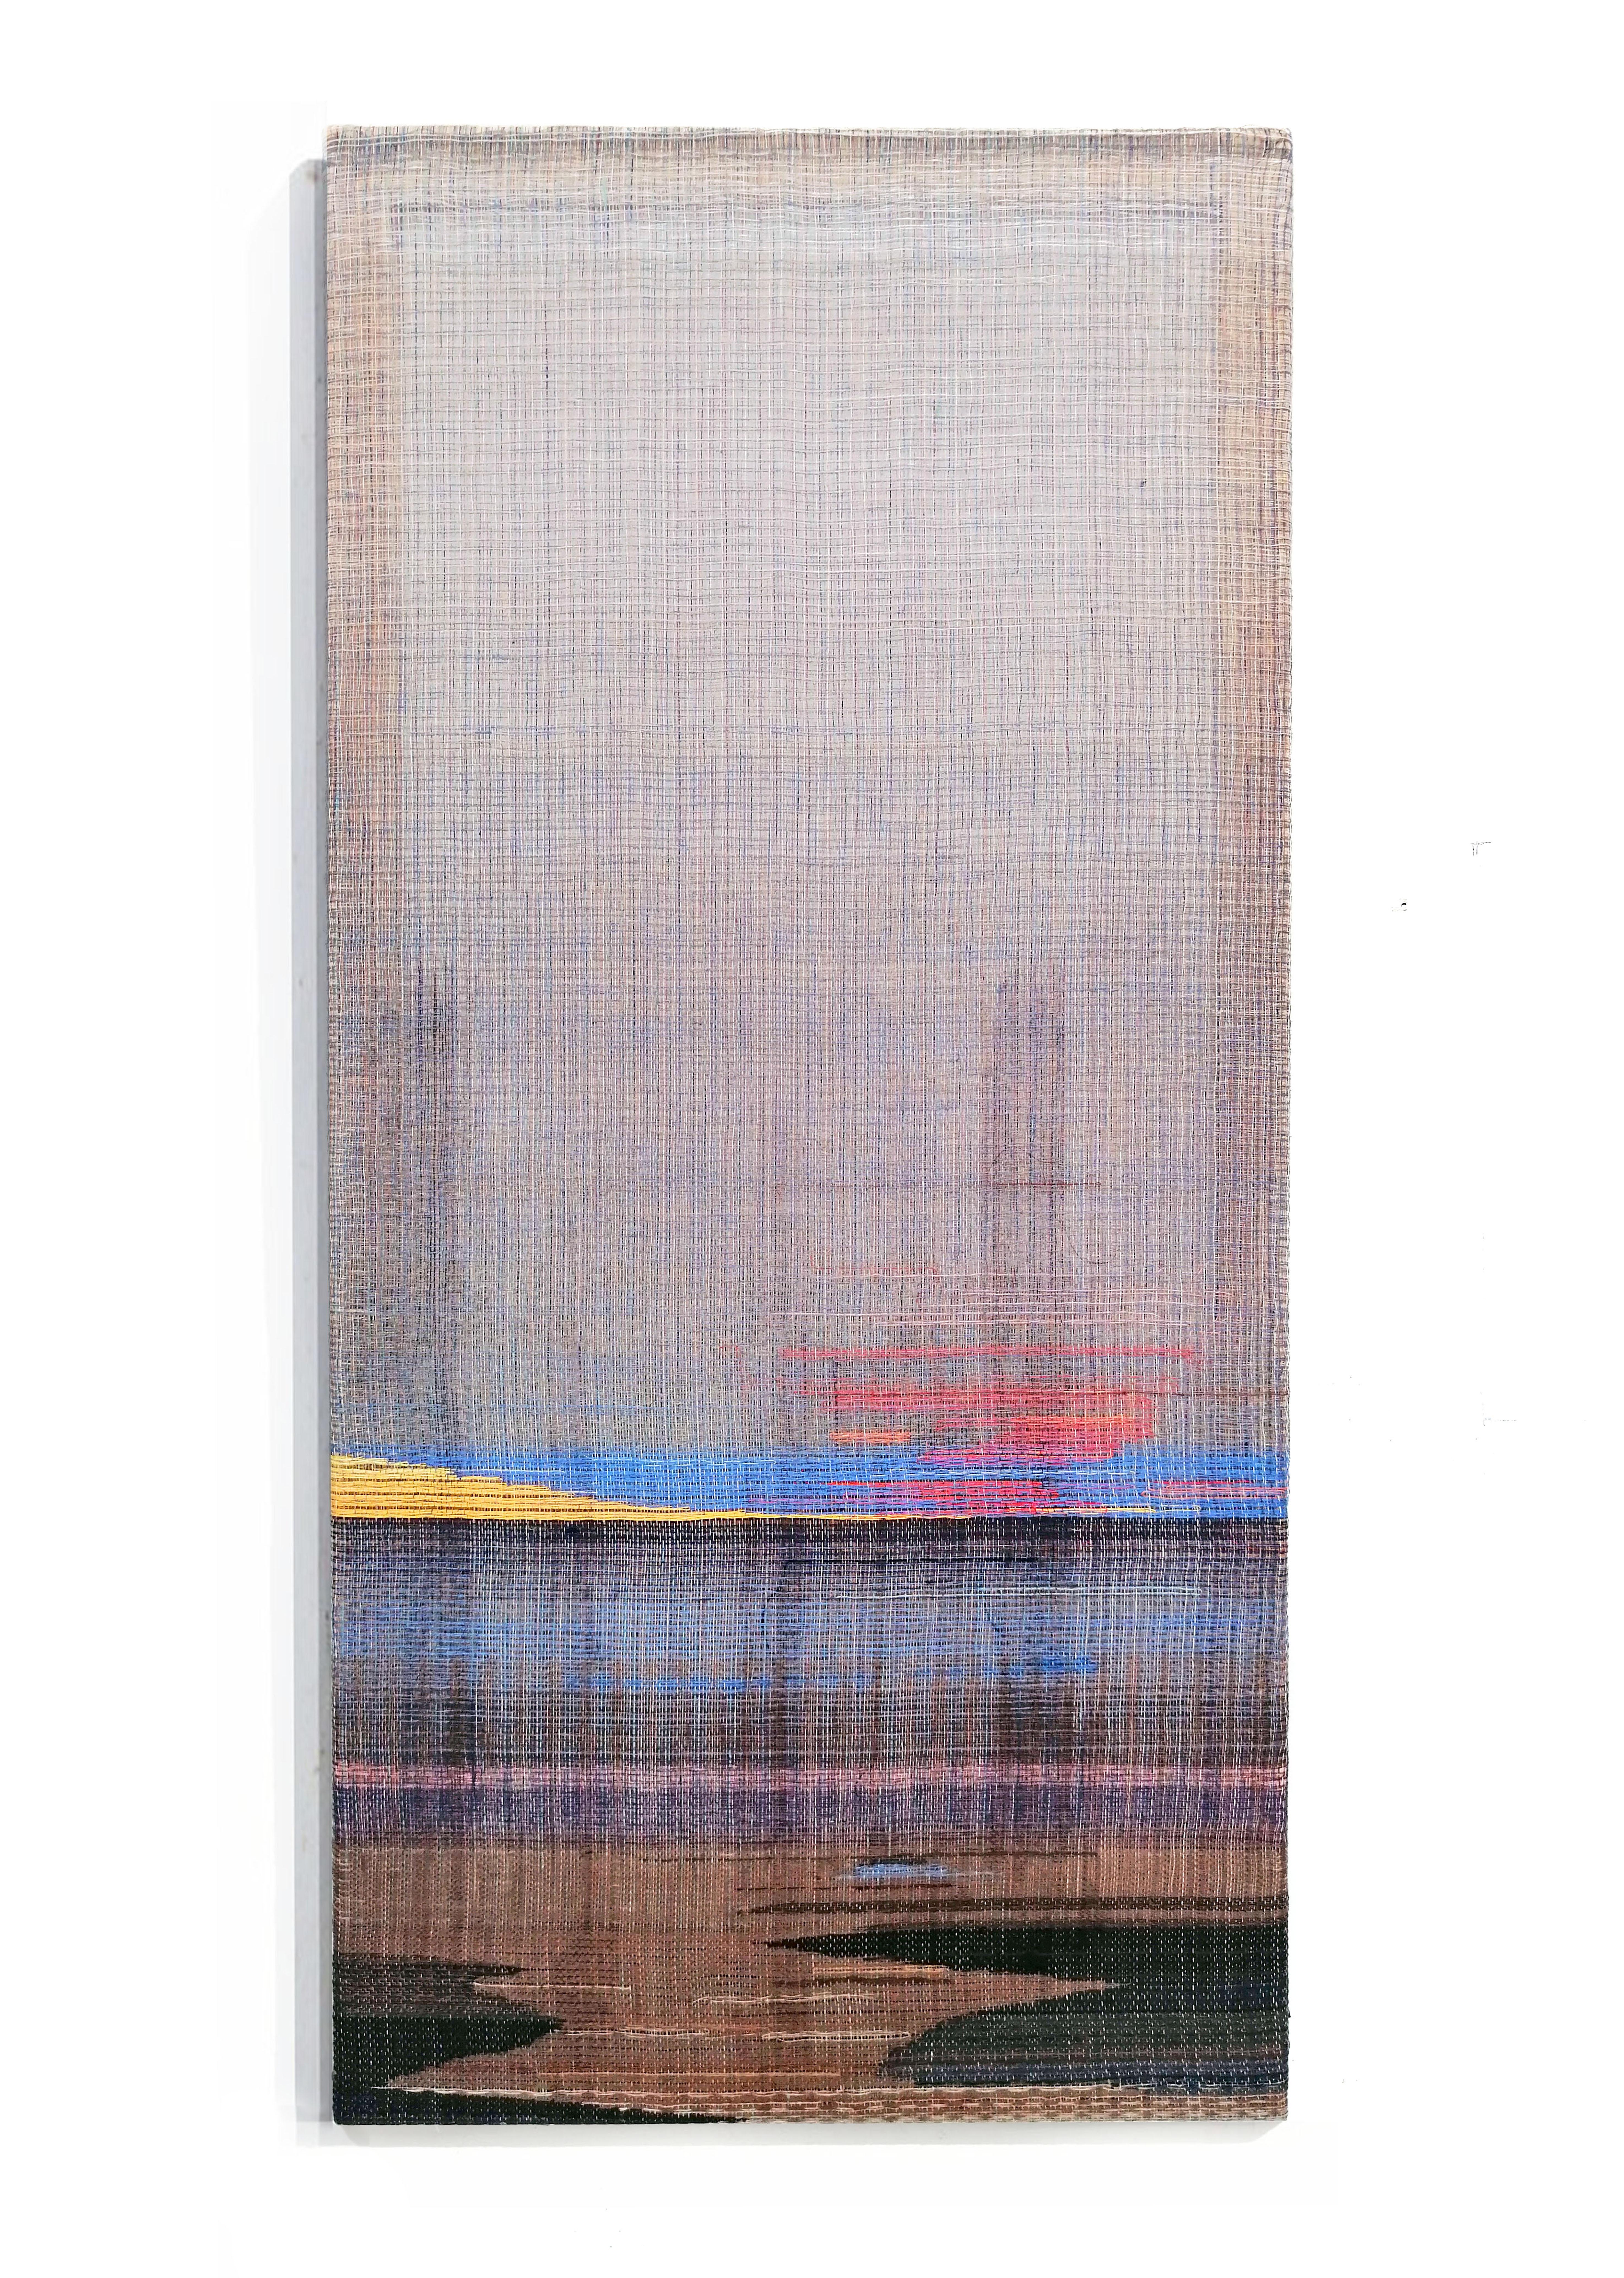 Horizon, Cabo Sardão - Abstract Landscape, Contemporary Painted and Woven Artwork